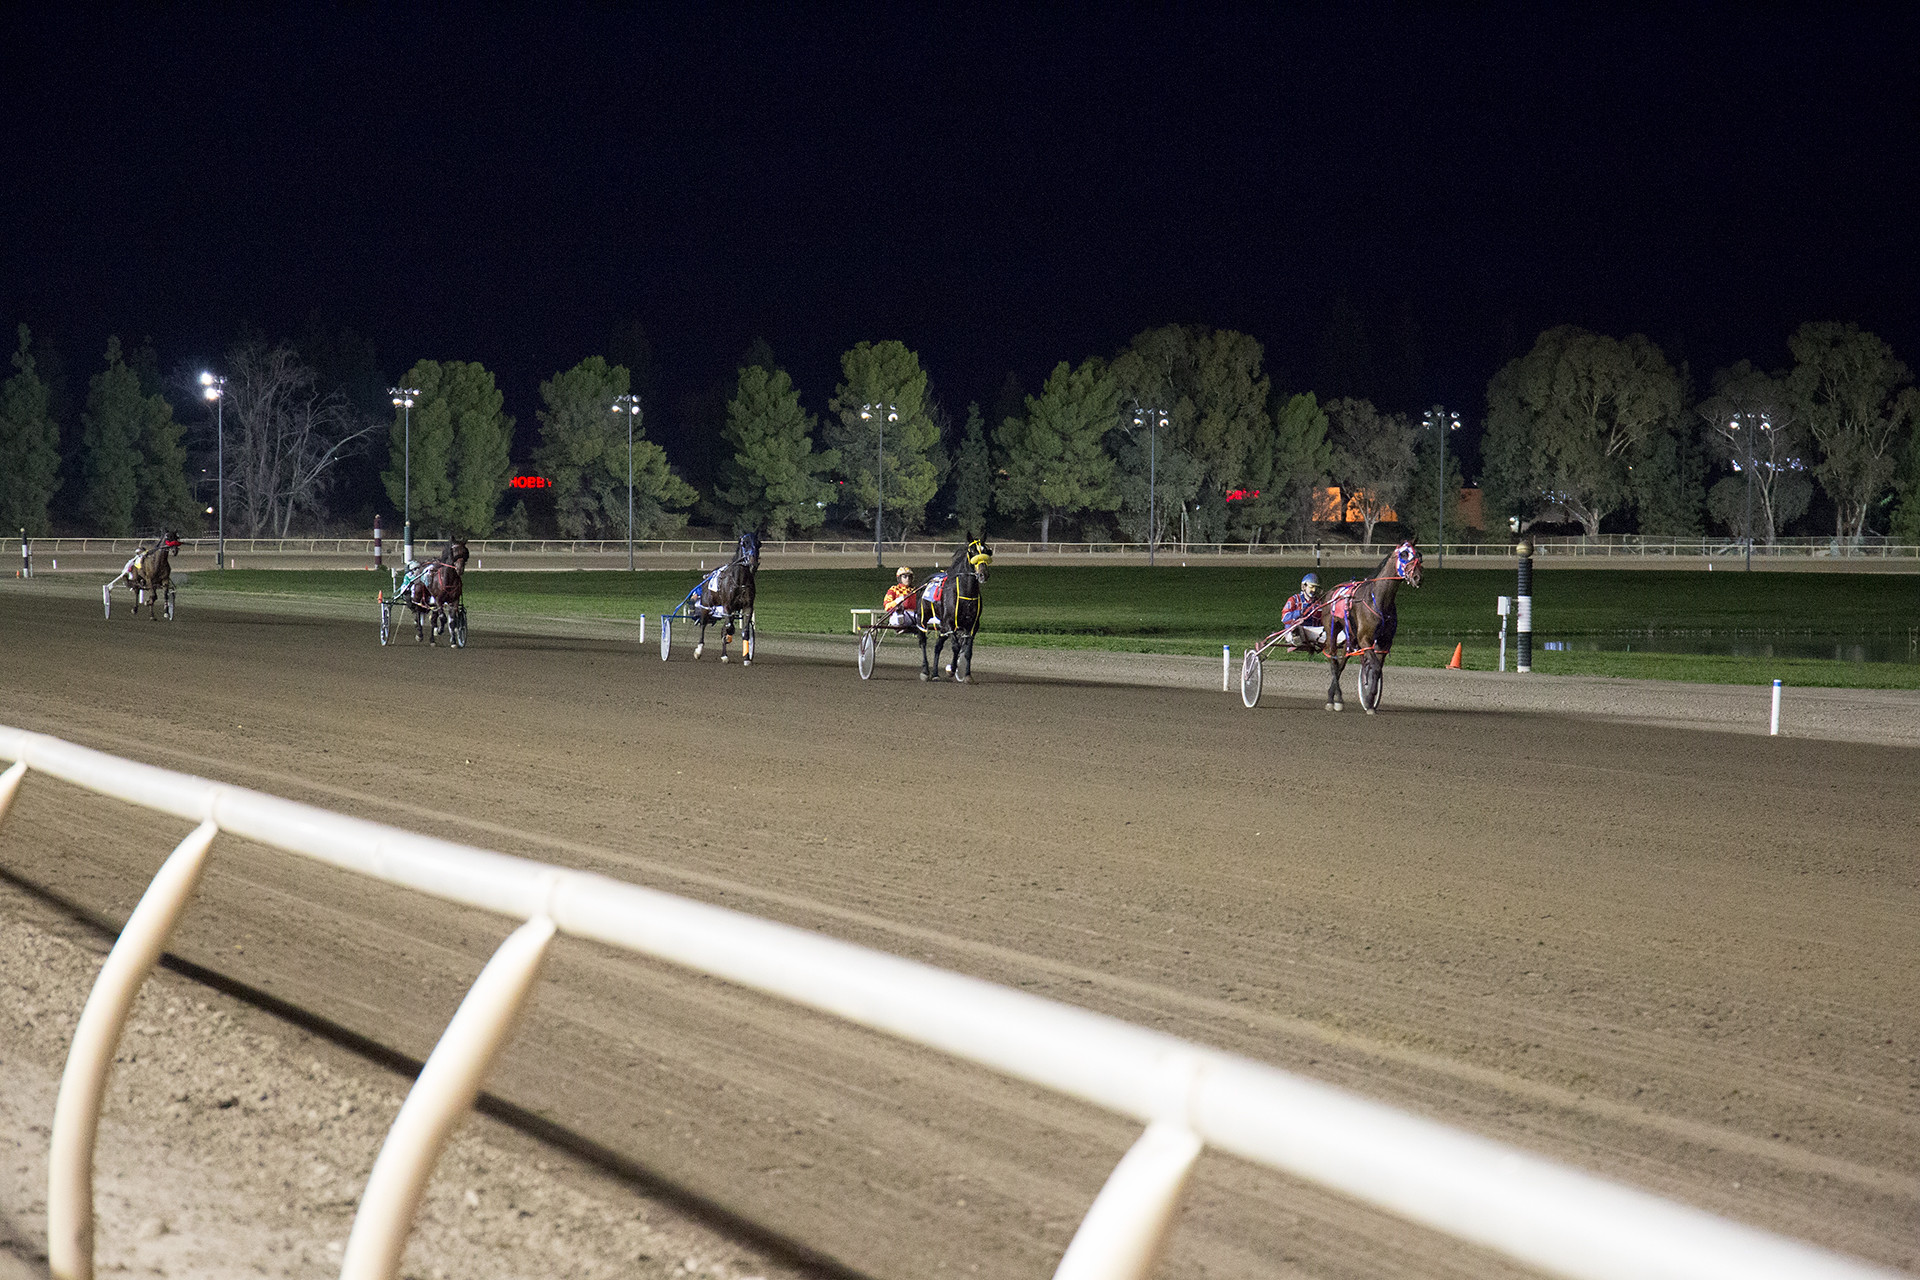 Night time harness racing. A line of racers.